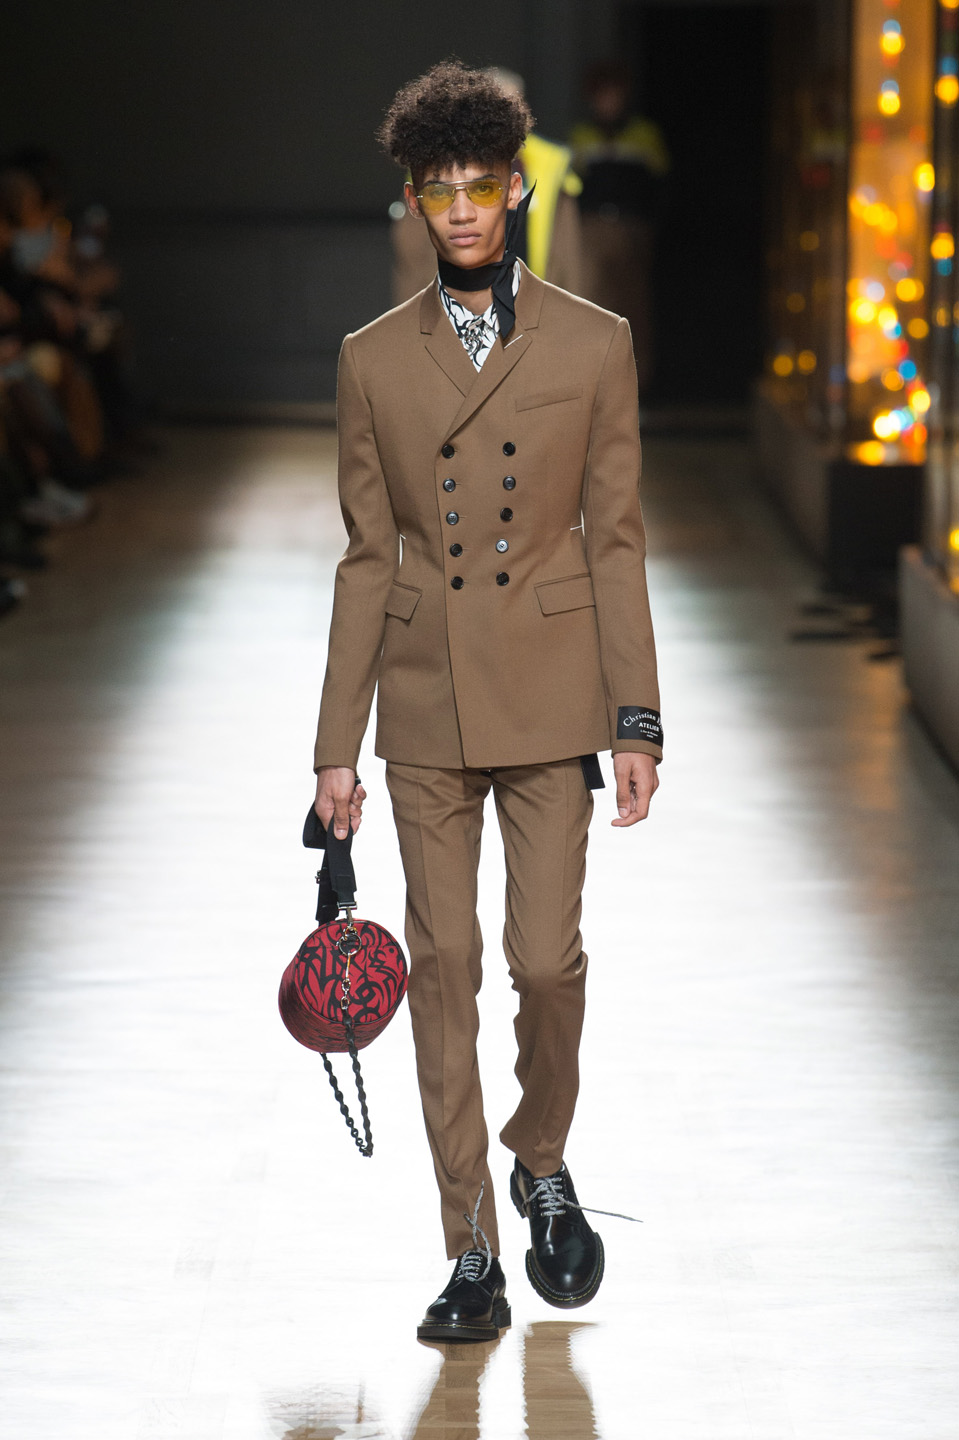 DIOR HOMME WINTER 18 19 BY PATRICE STABLE look32 Fall/WInter 2018 runway